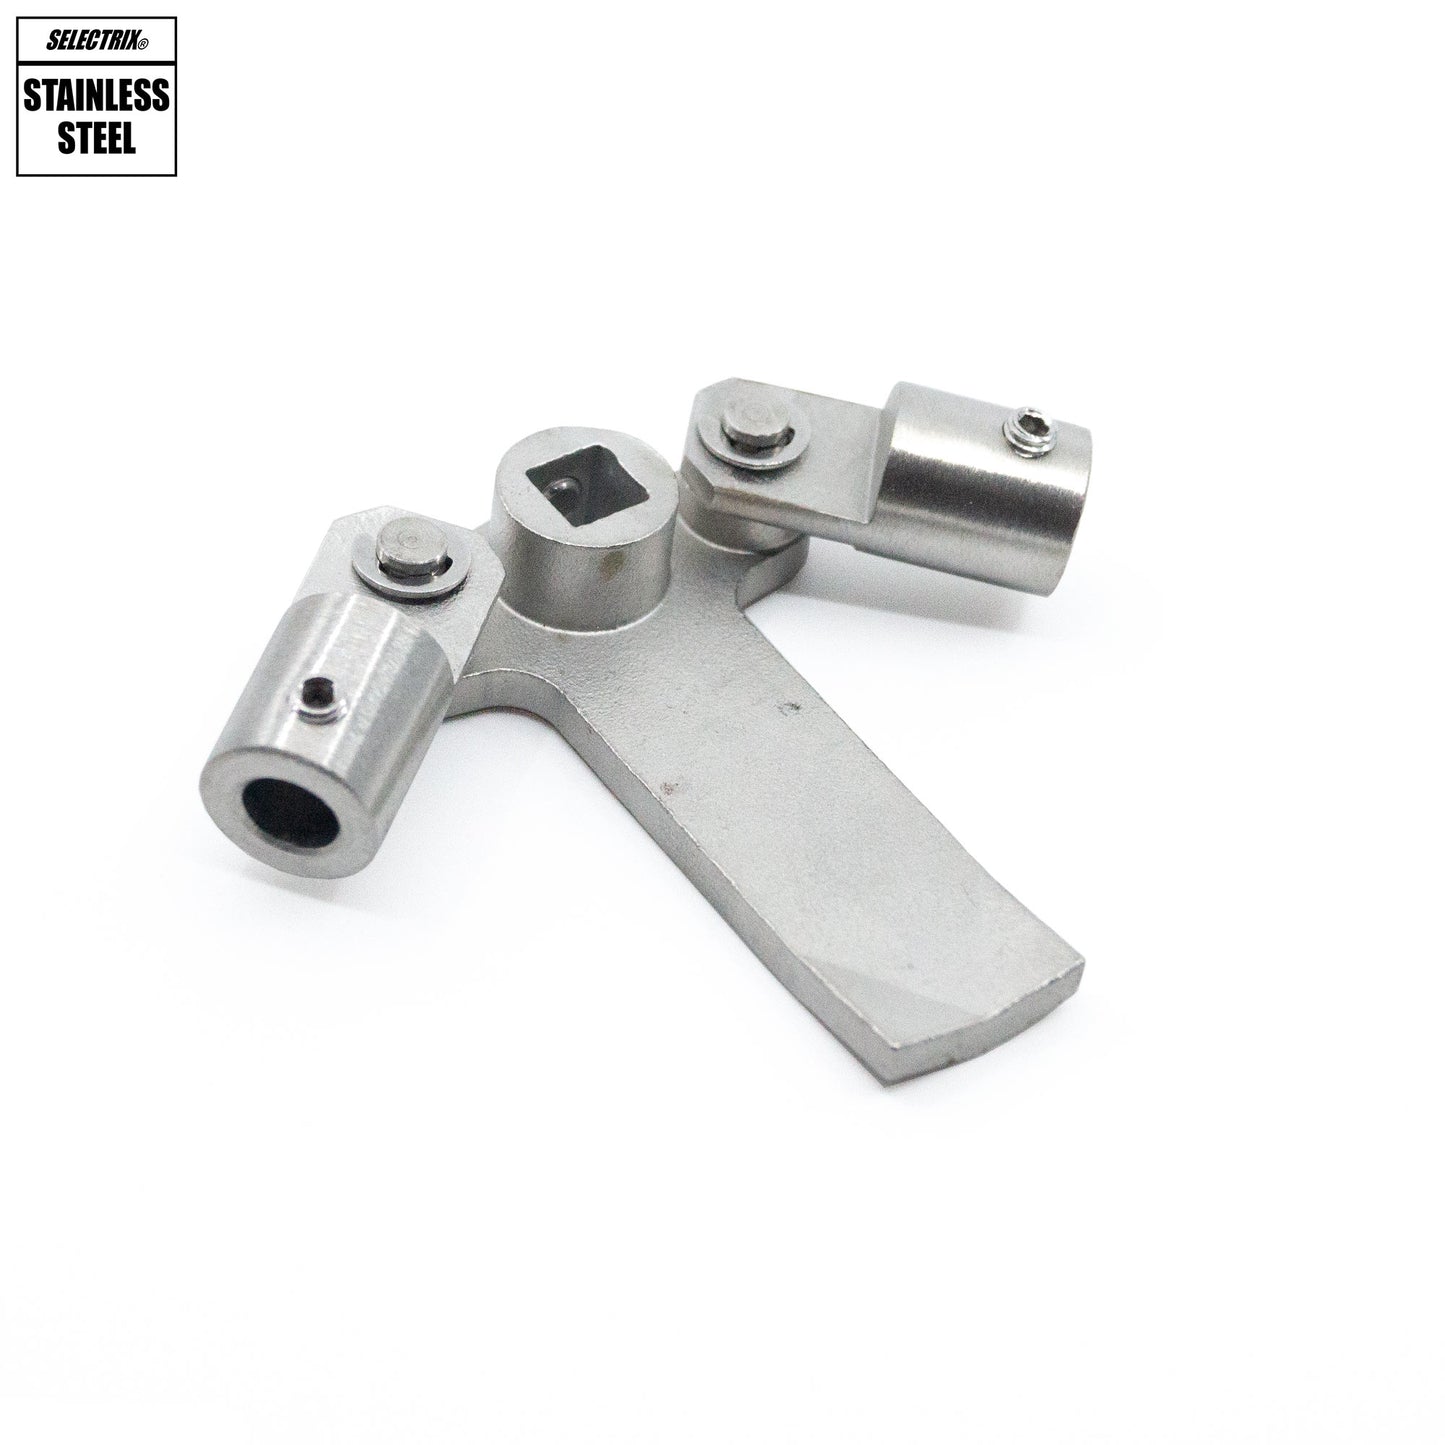 3-Point Adjustable Cam With Rod Adaptors - Stainless Steel